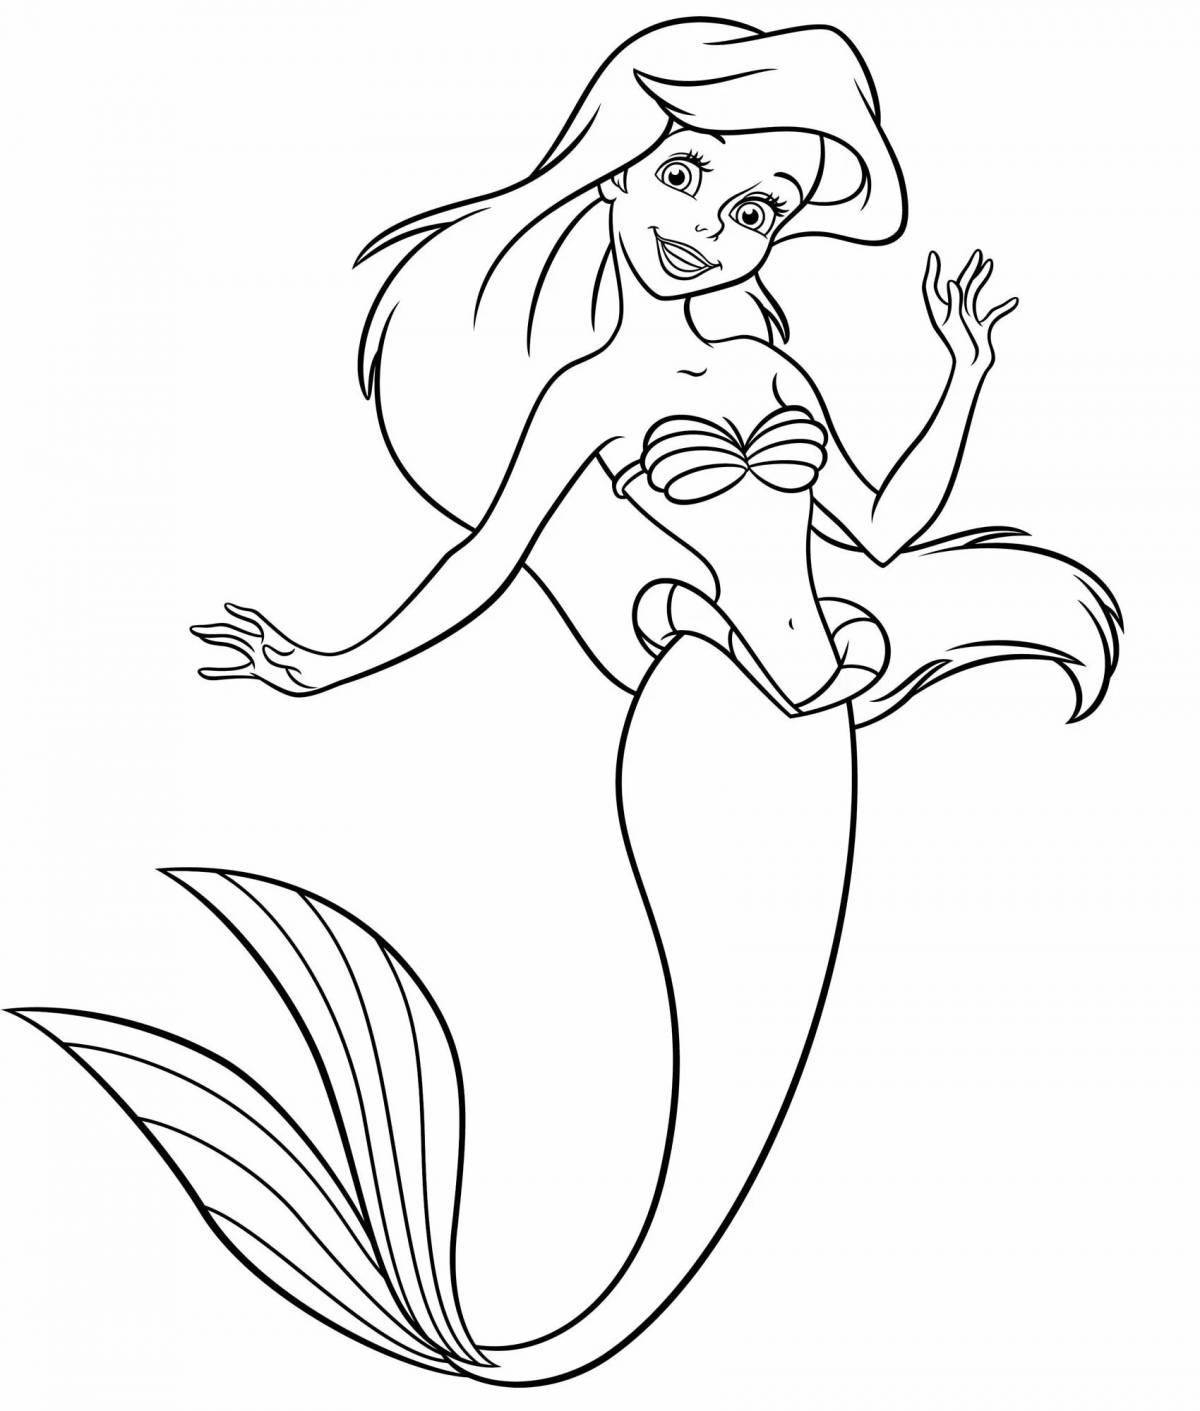 Charming little mermaid coloring book